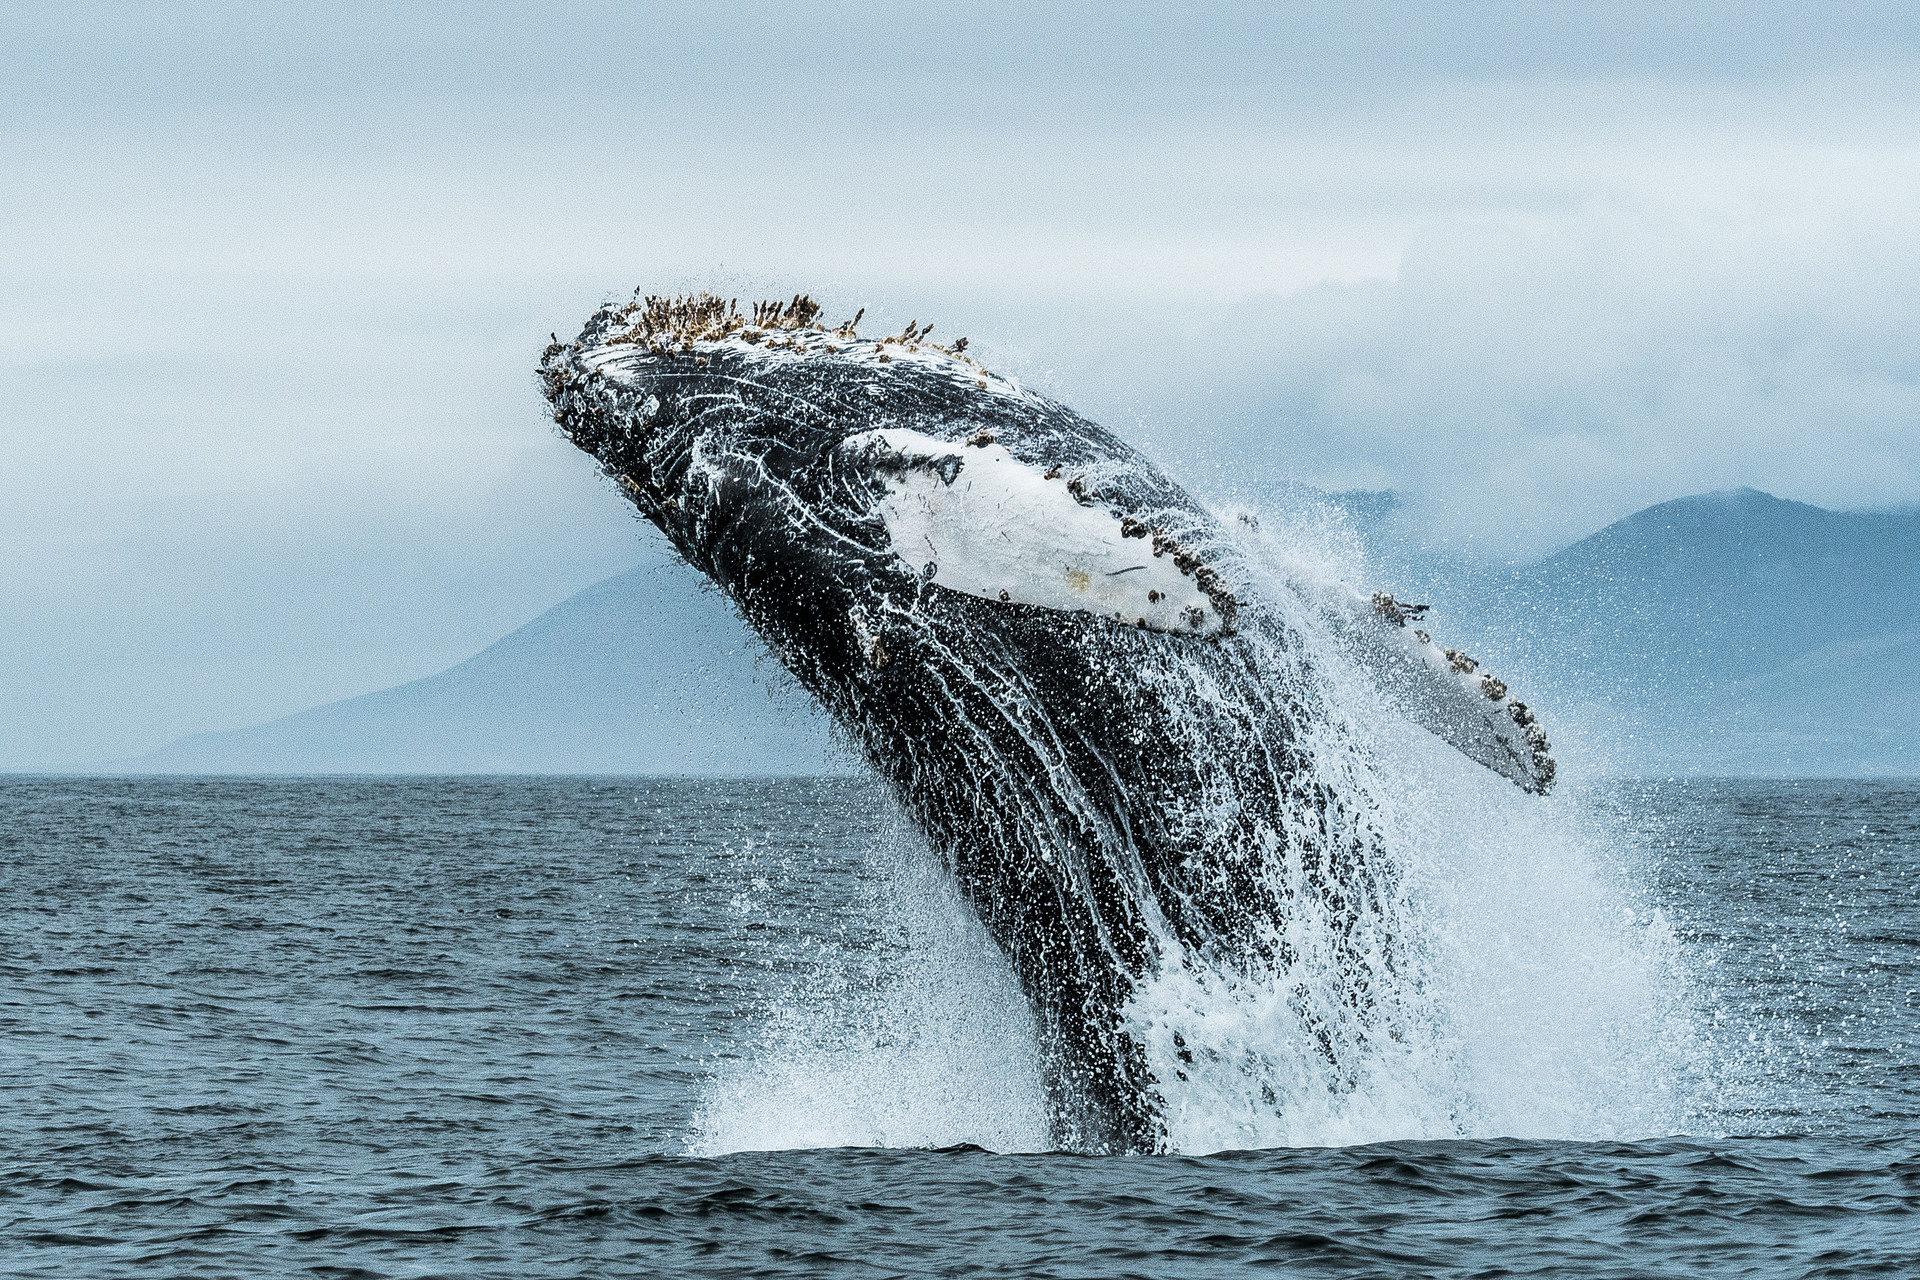 a whale, covered in barnacles, leaps almost entirely out of the water